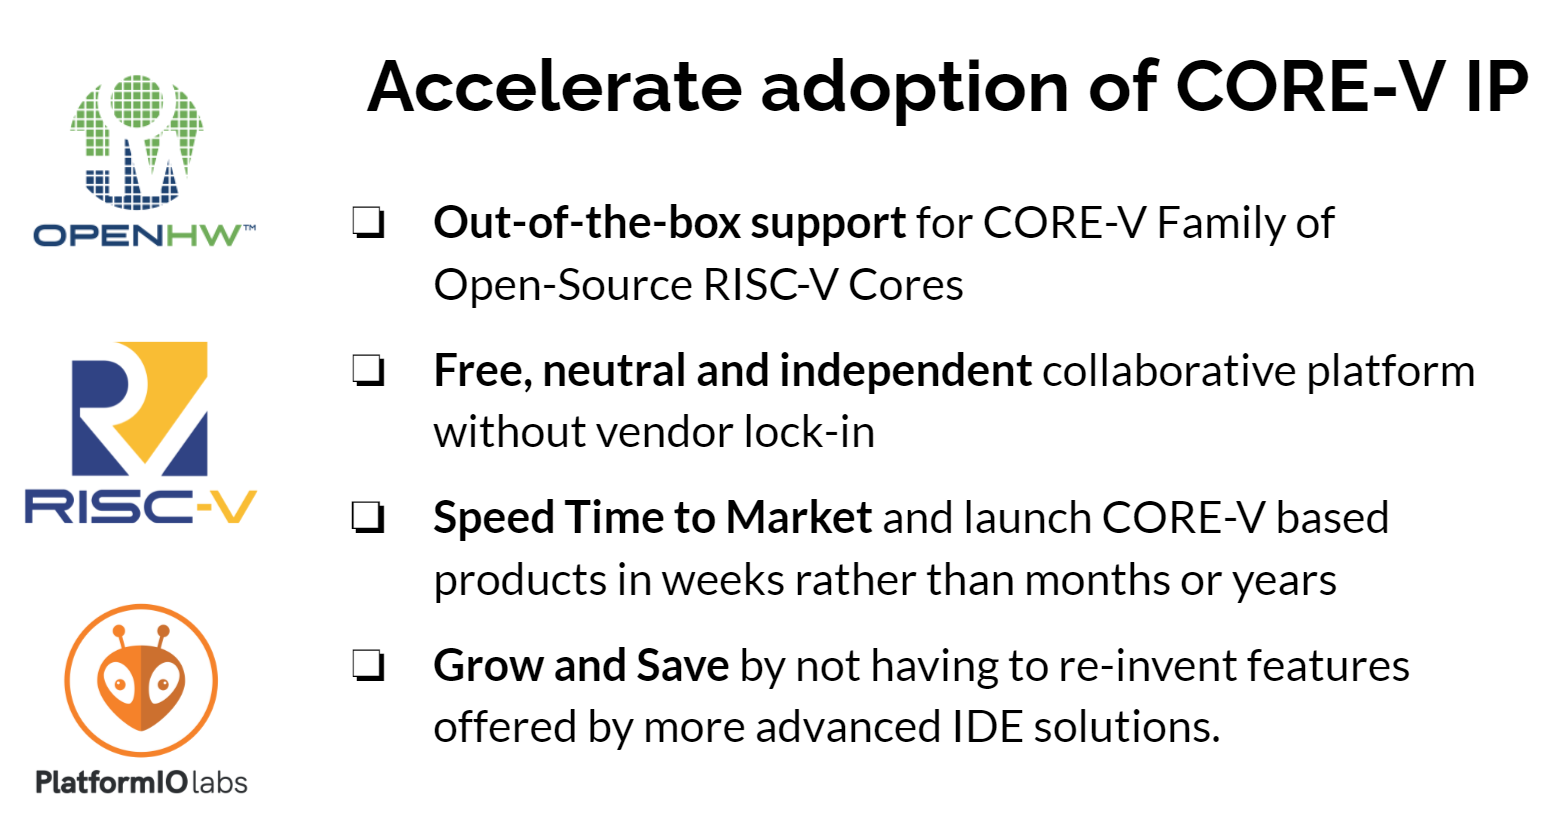 Accelerate adoption of CORE-V IP